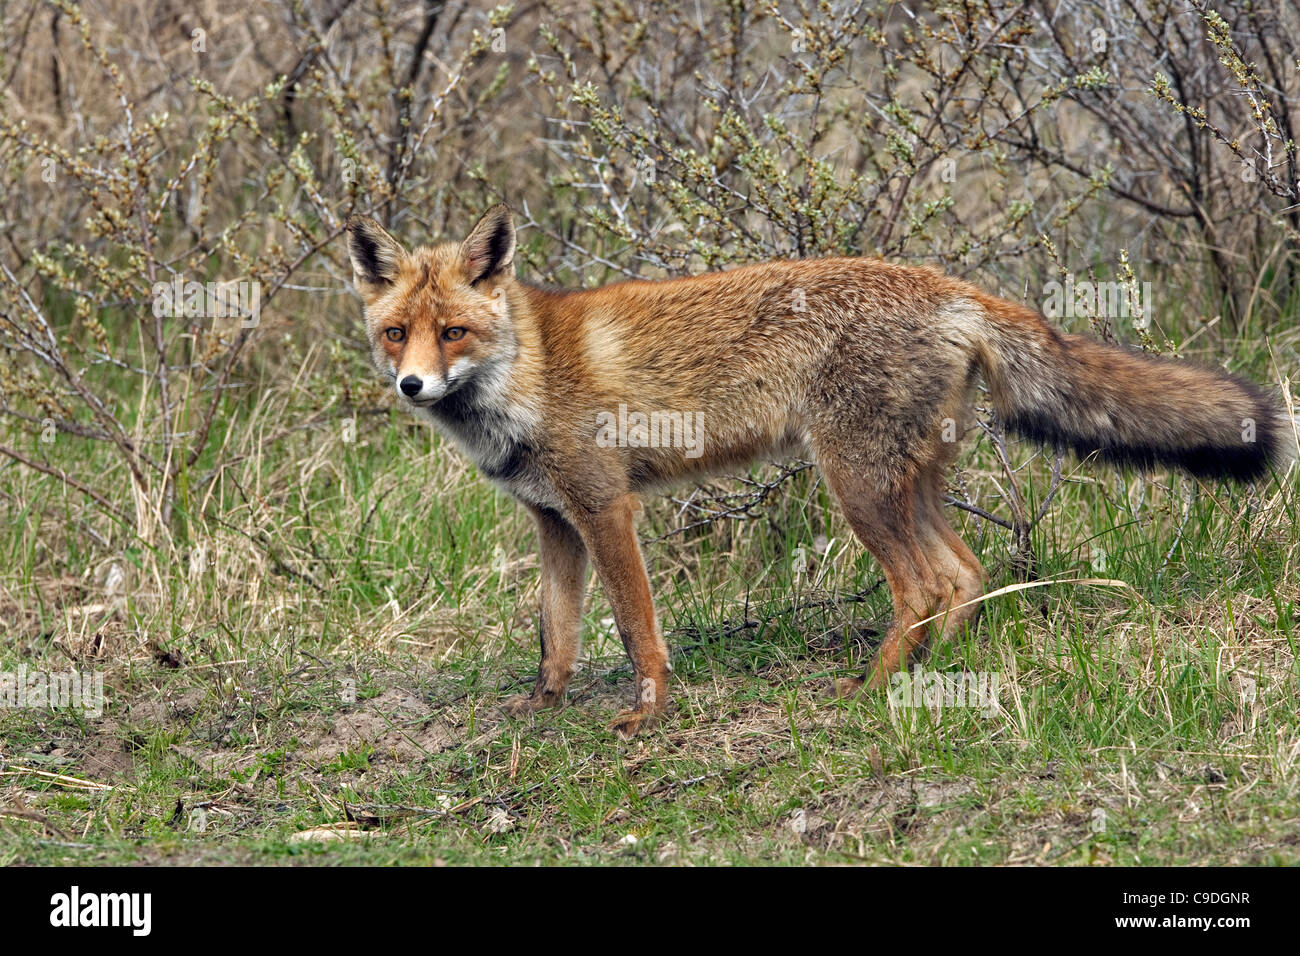 Red fox (Vulpes vulpes) in thicket Stock Photo